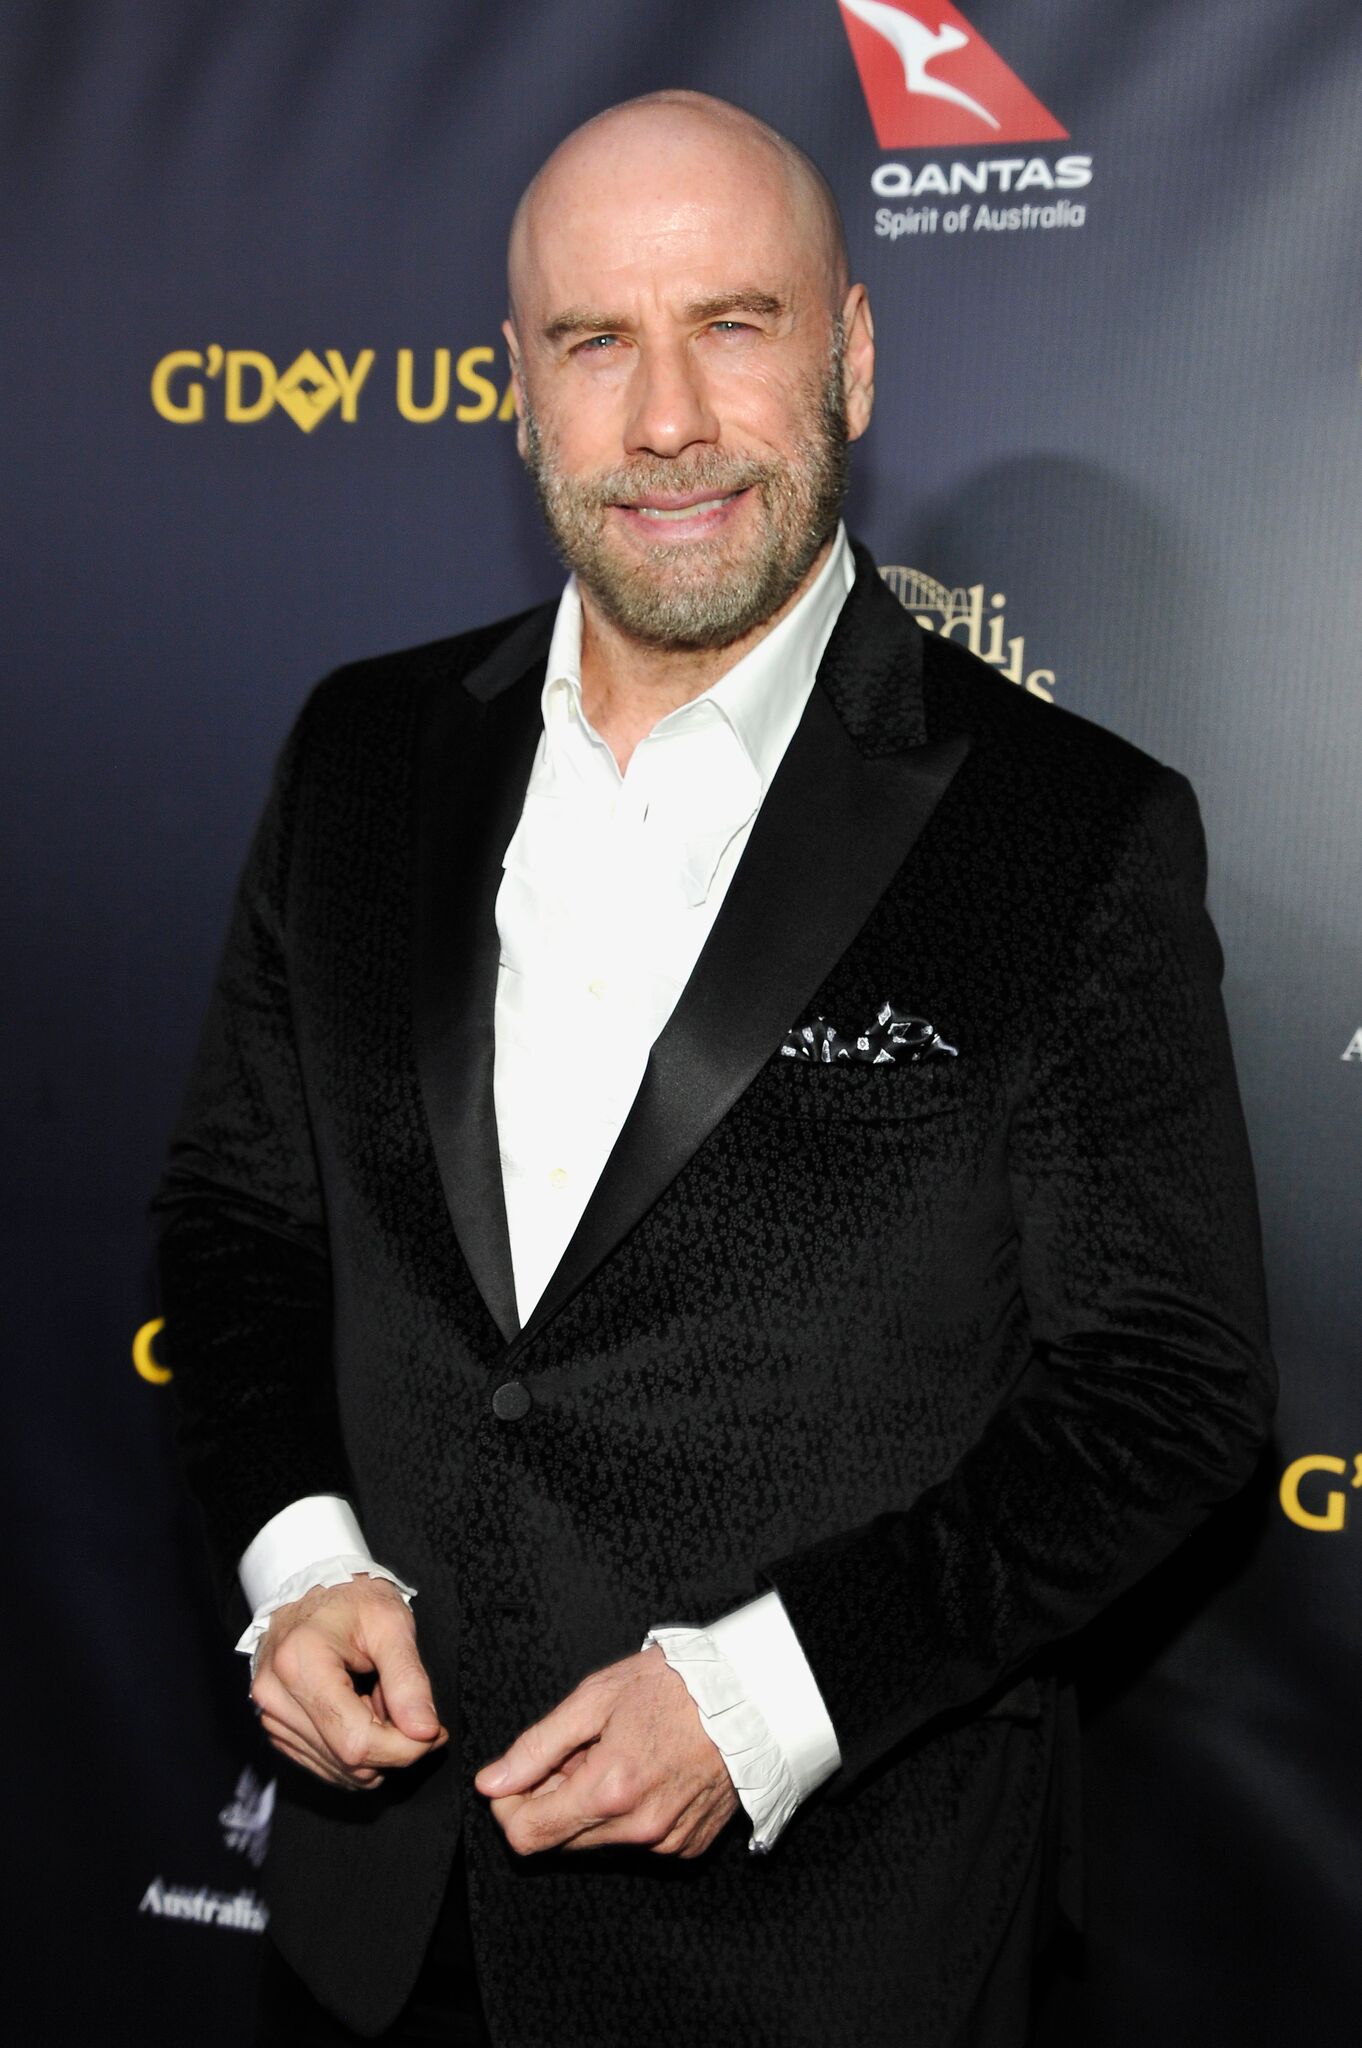 John Travolta at 3LABS on January 26, 2019 in Culver City, California | Photo: Getty Images